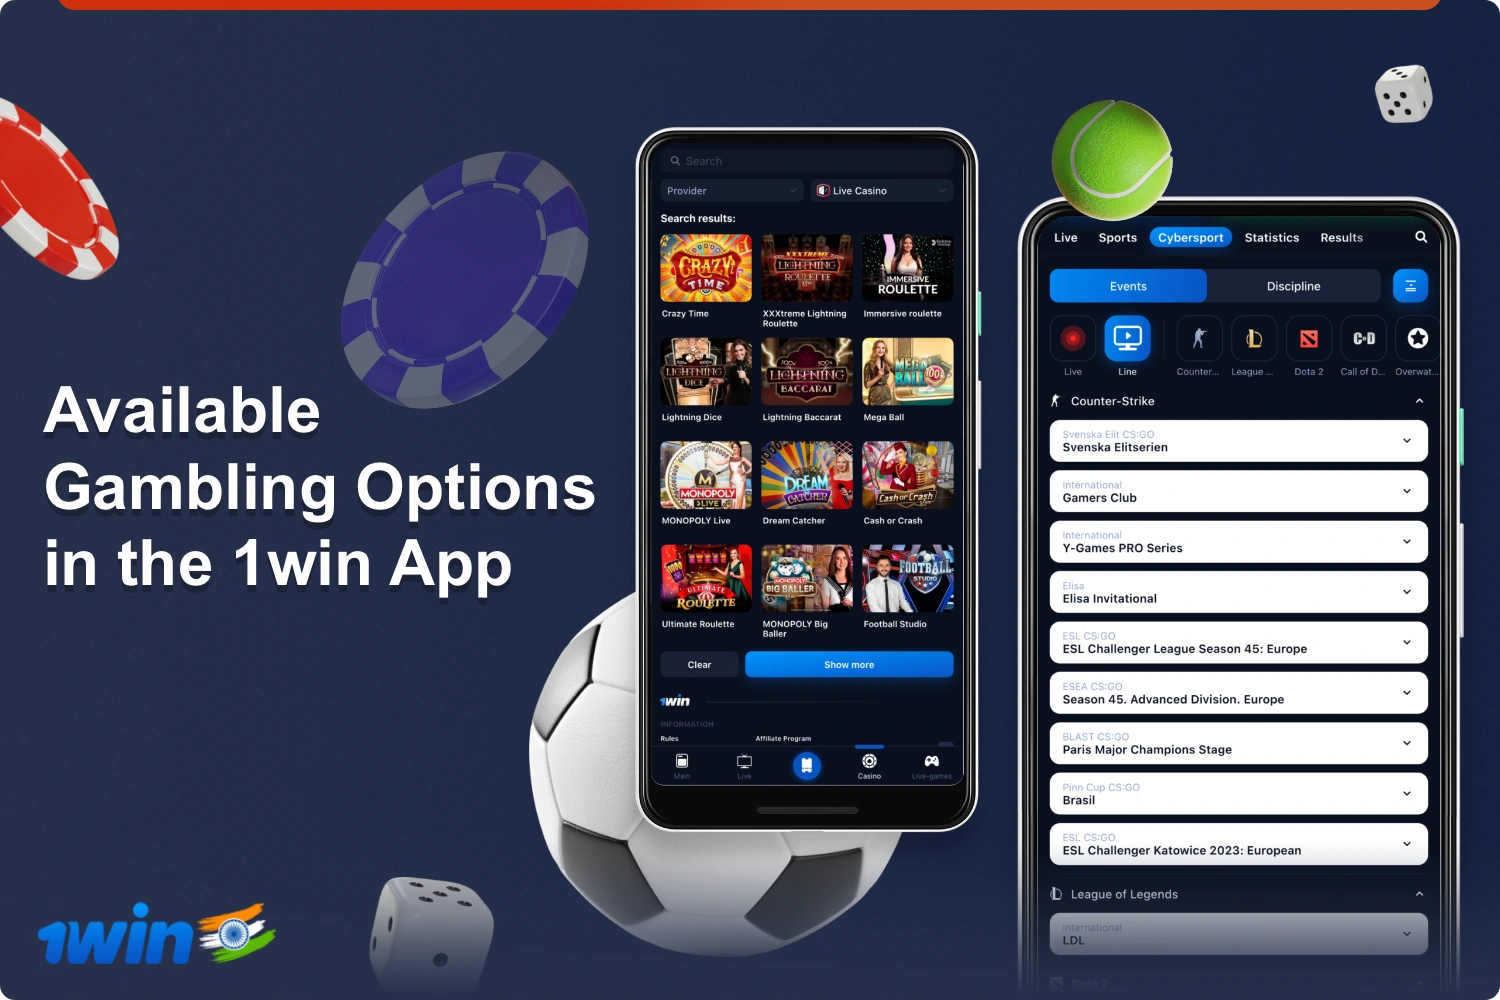 The same betting and casino options are available in the mobile app 1win as on the website